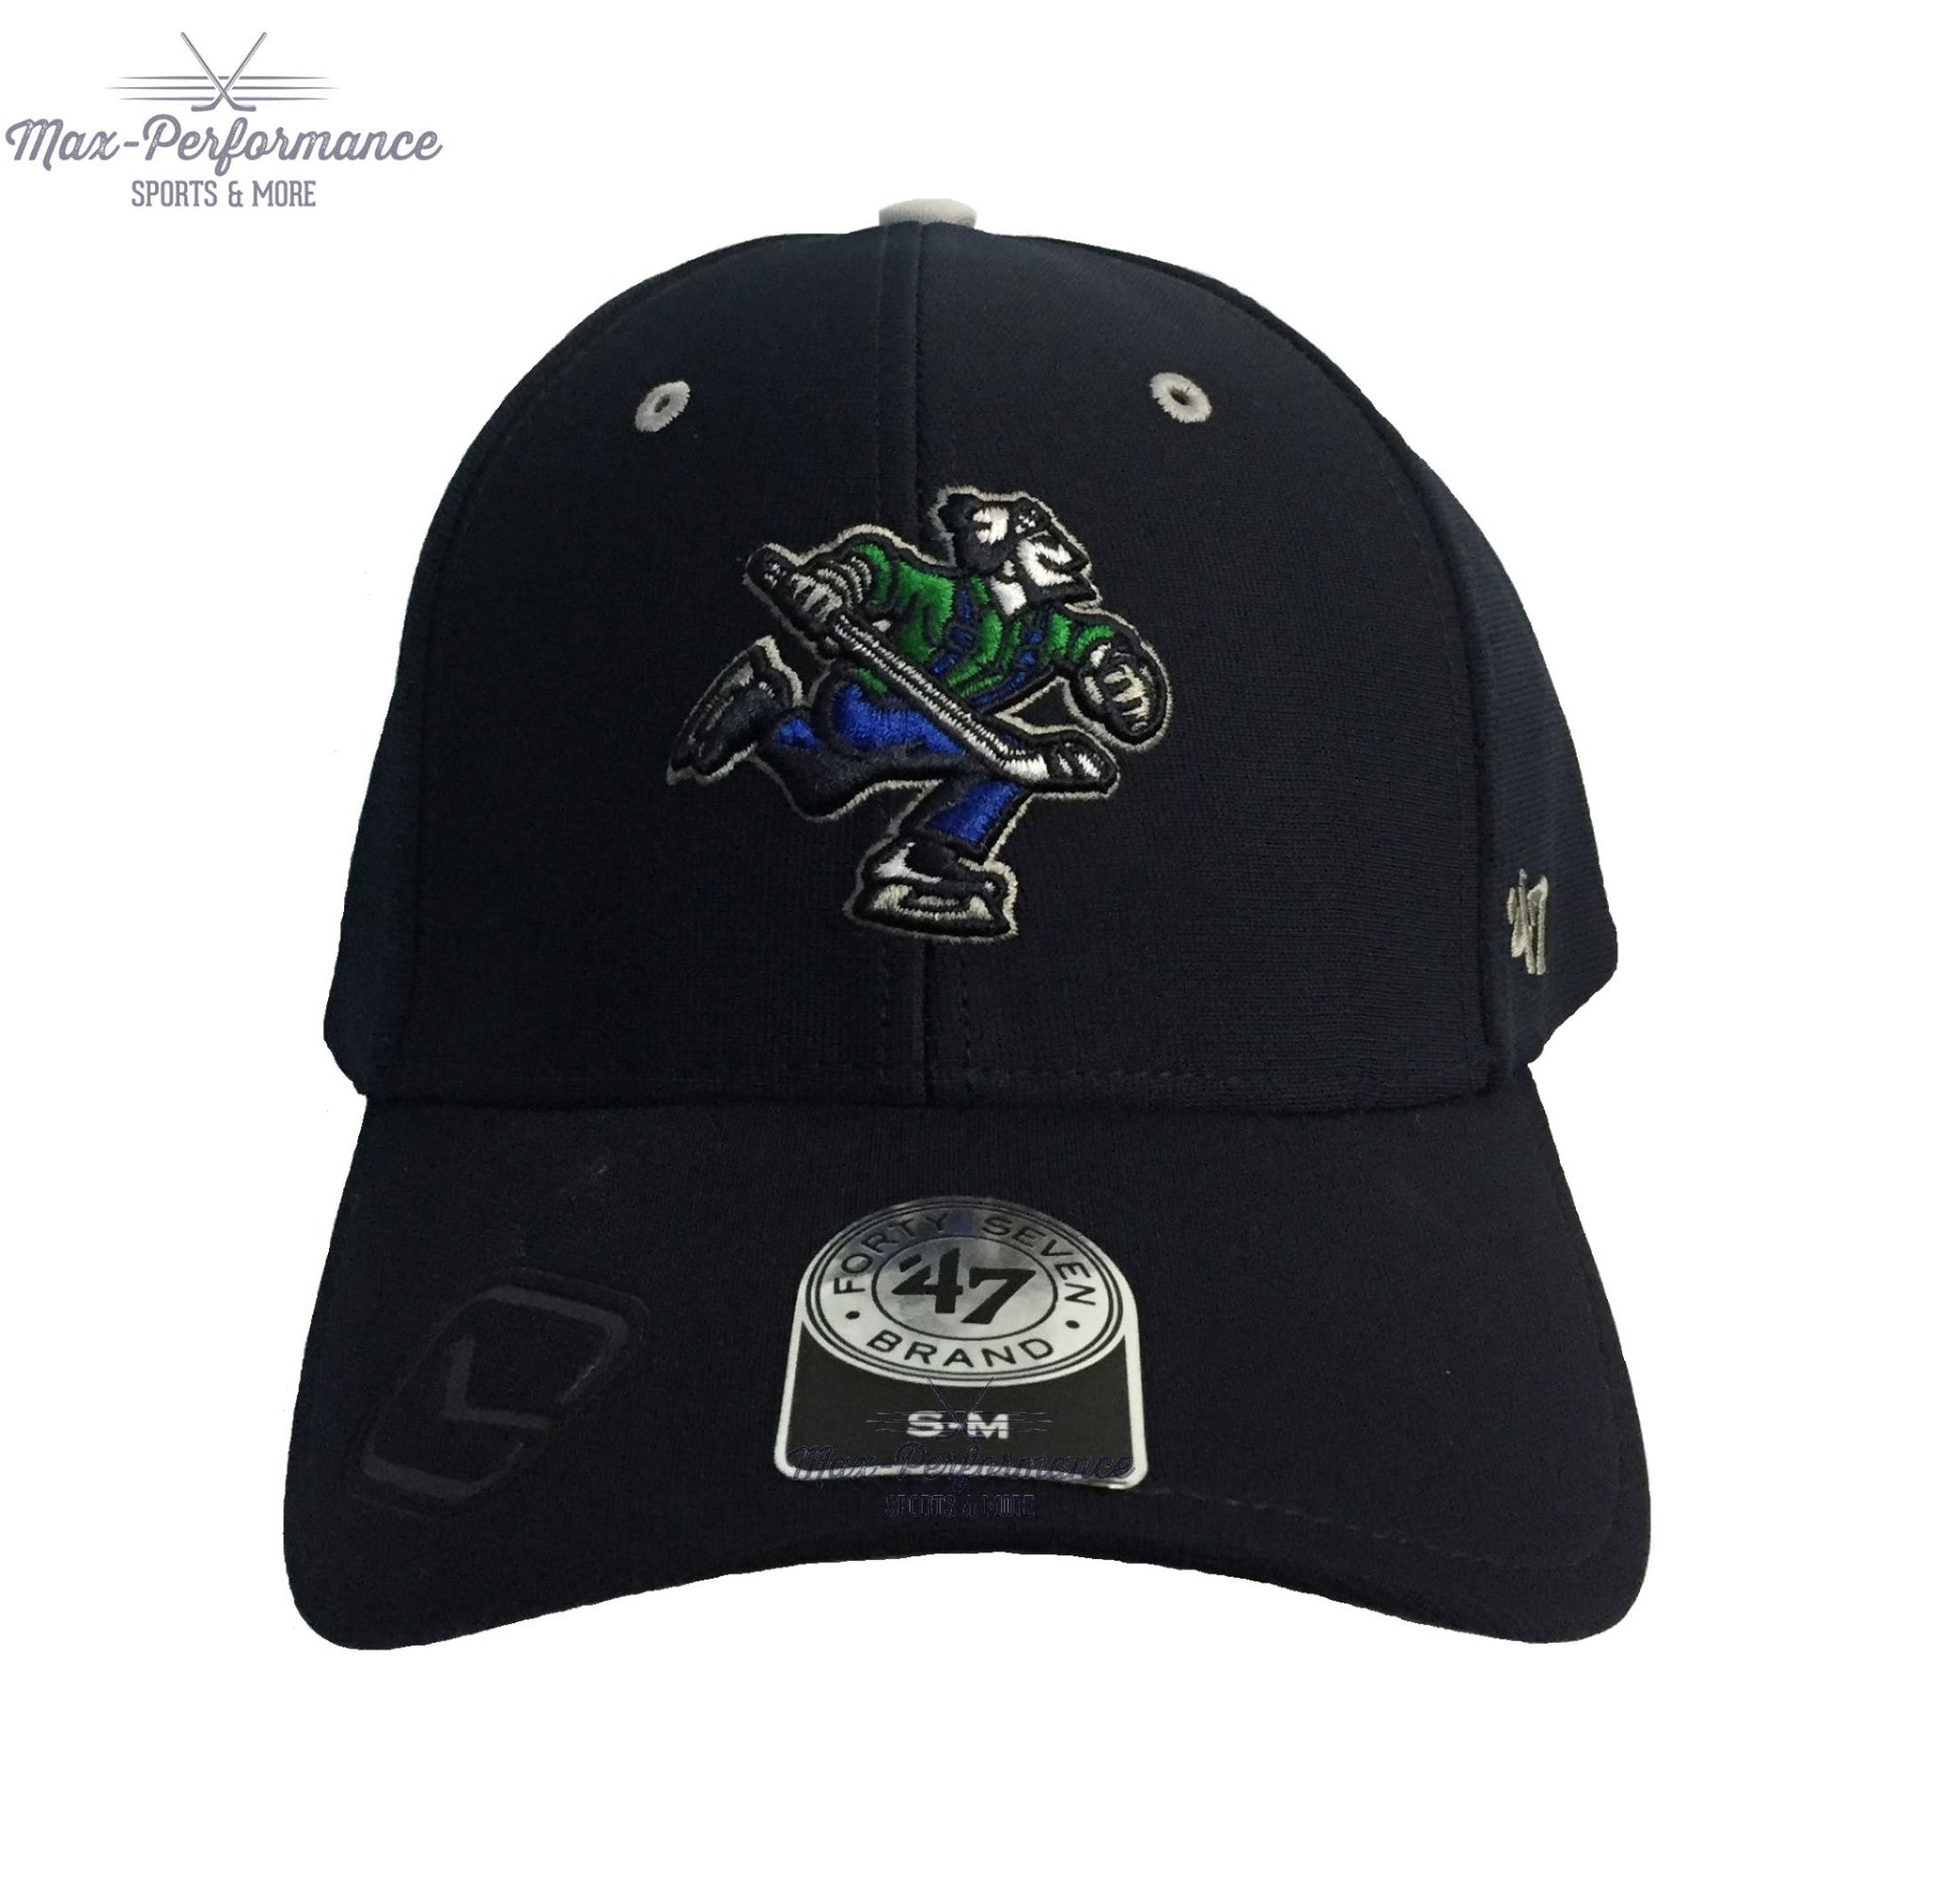 johnny canuck hat